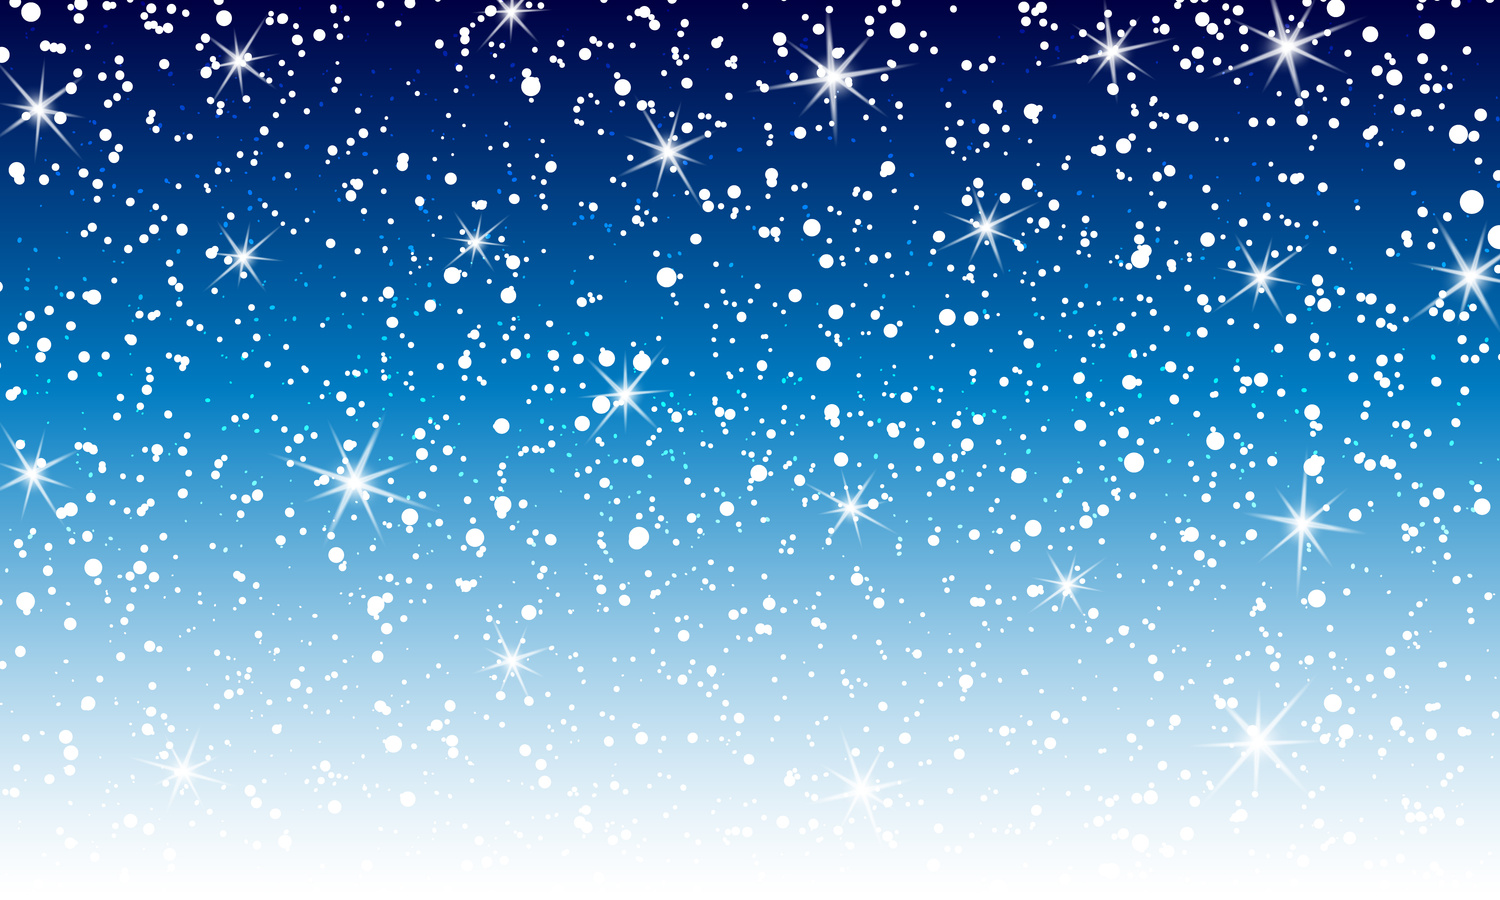 Snow background. Falling snow. Christmas background. Winter snowfall. White snowflakes and stars on blue sky.